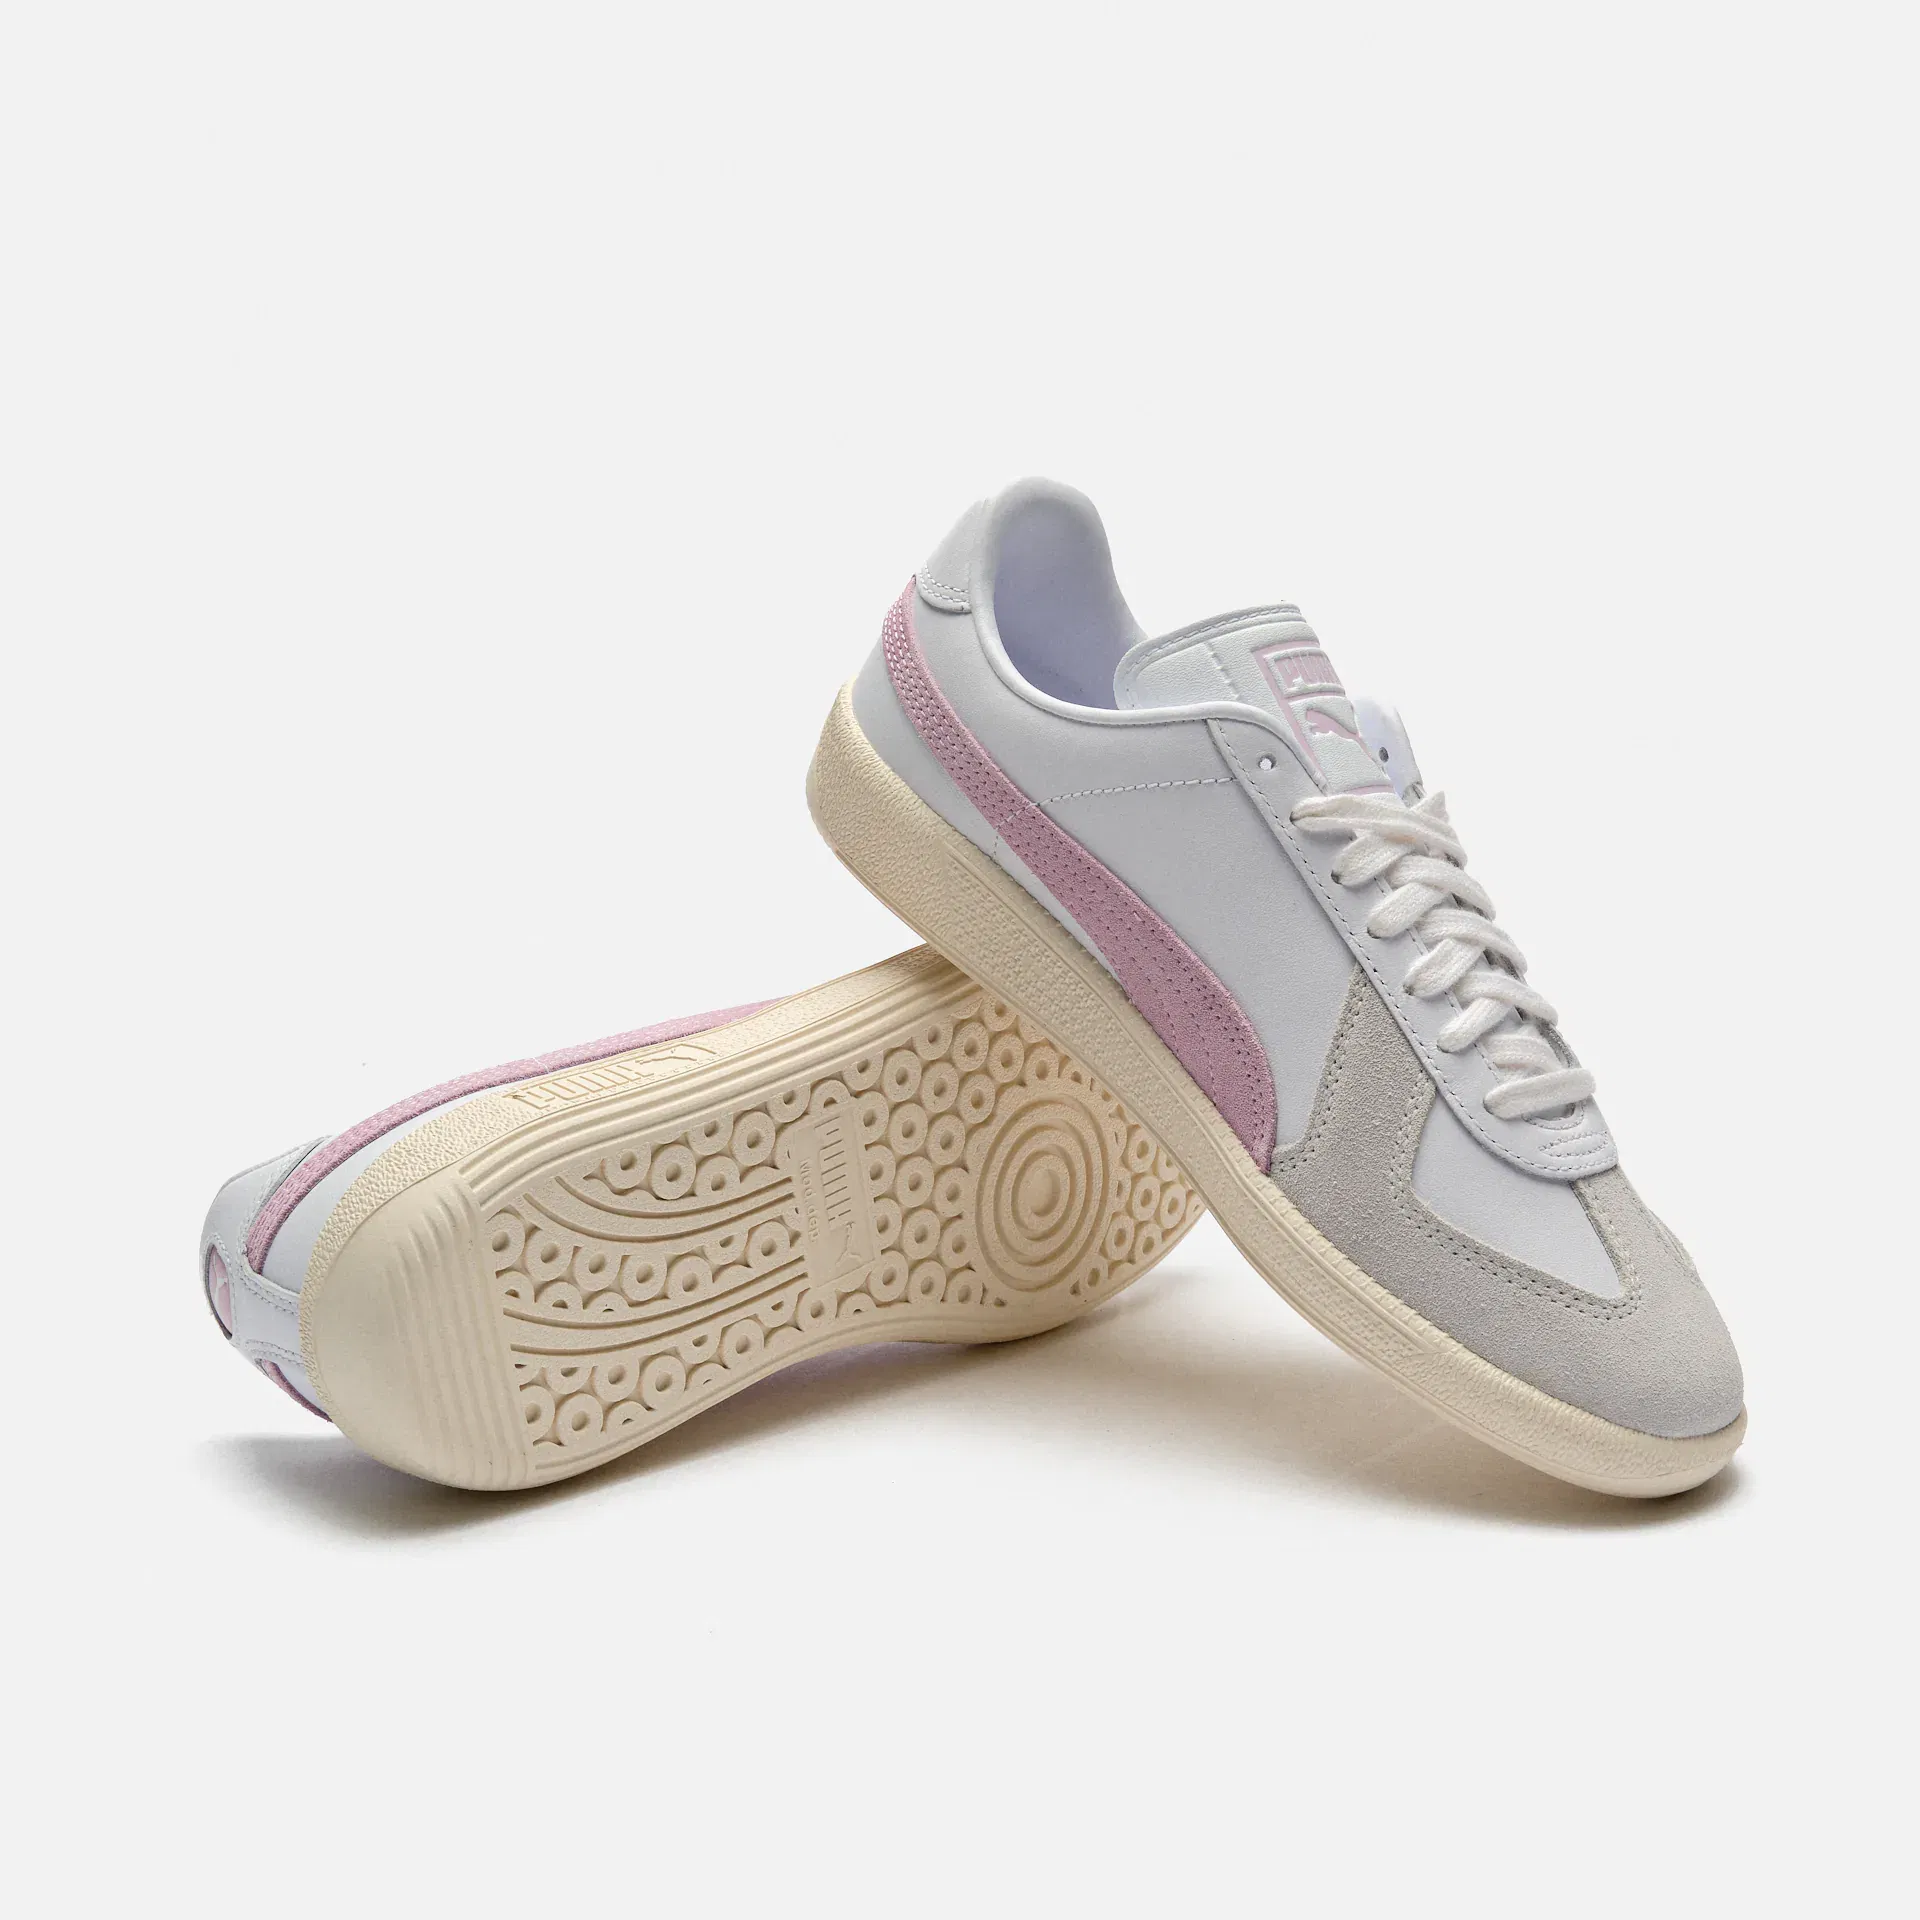 PUMA Army Trainer Sneaker White/Feather Grey